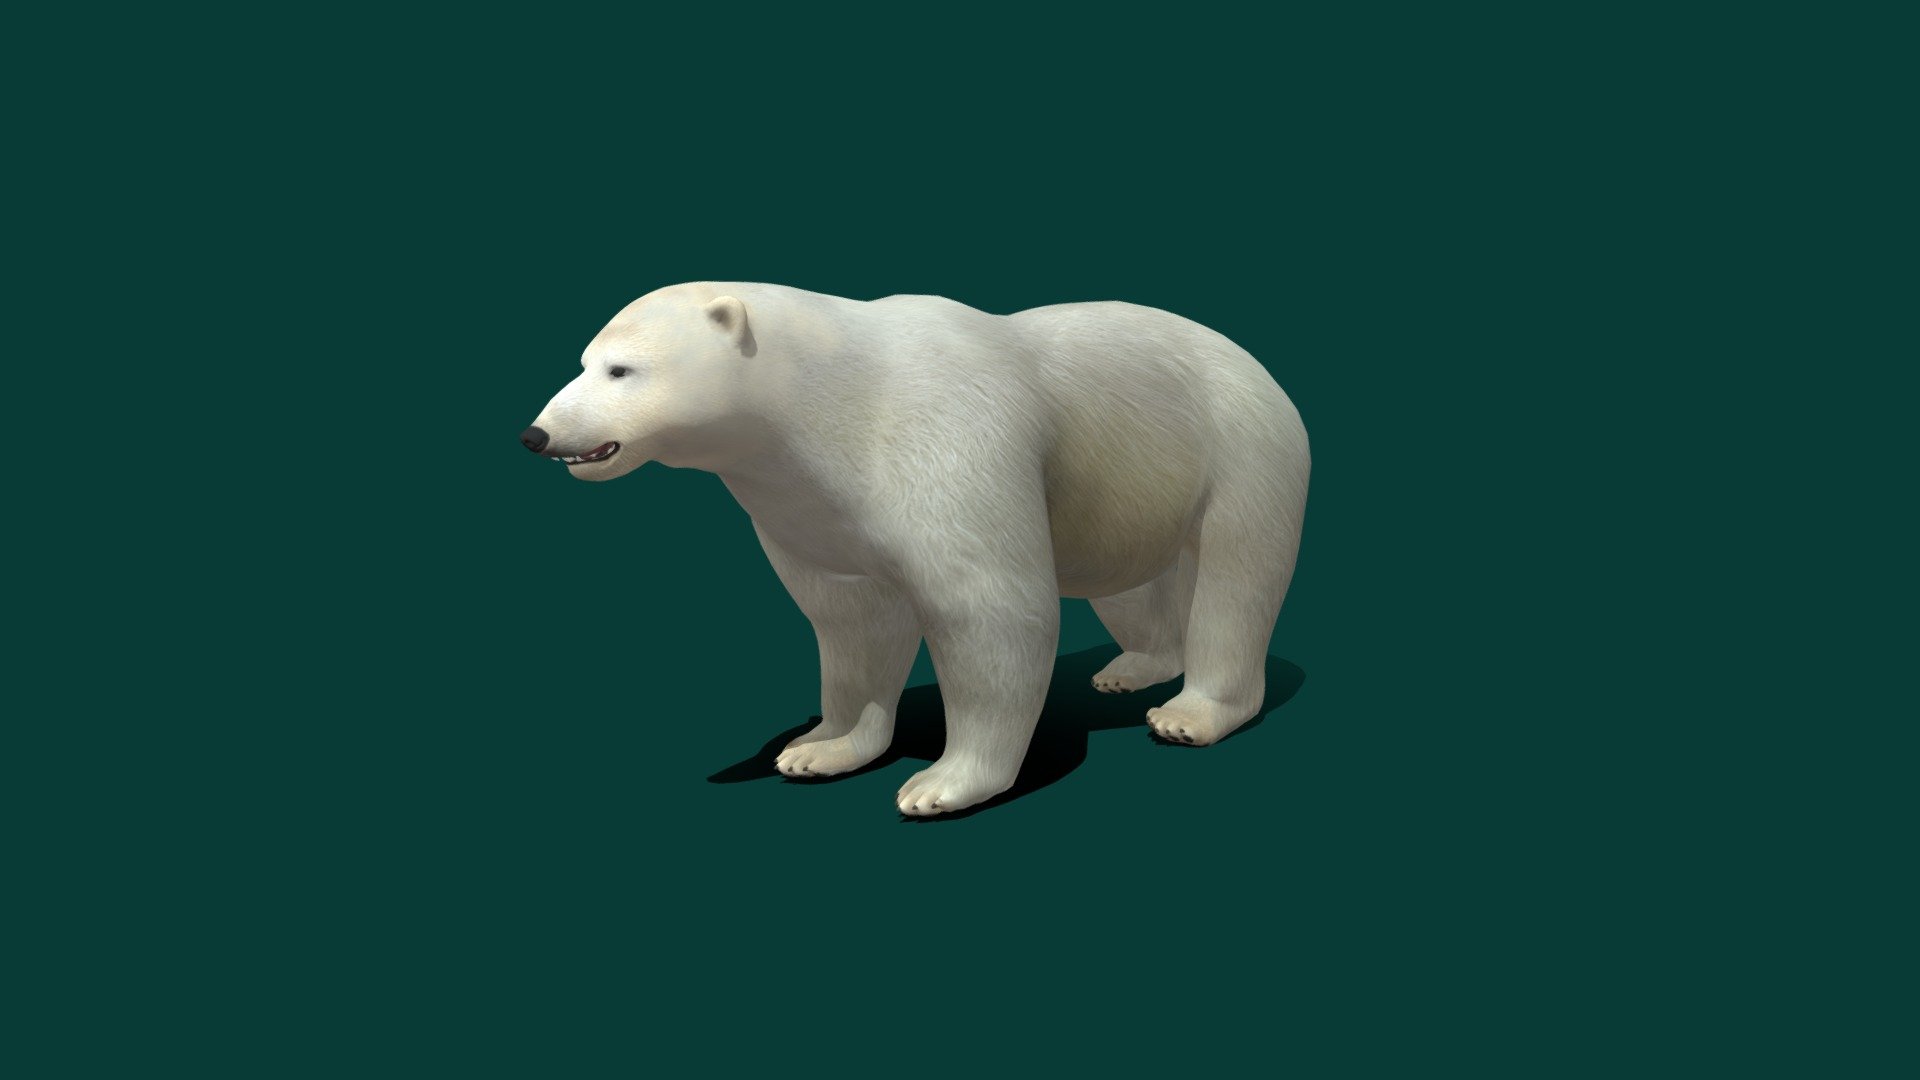 The polar bear is a hypercarnivorous species of bear. Its native range lies largely within the Arctic Circle, encompassing the Arctic_Ocean and its surrounding seas and landmasses, which includes the northernmost regions of North America and Eurasia. Wikipedia
Eats: Seals, Arctic fox
Mass: 450 kg (Male, Beaufort Sea population, Mature), 150 – 250 kg (Female, Adult)
Conservation status: Vulnerable (Population decreasing) Encyclopedia of Life
Speed: 40 km/h (Maximum, Adult, Sprint)
Height: 1.8 – 2.4 m (Female, Adult, On hind legs), 1.3 m (Male, Adult, At Shoulder)
Class: Mammalia
Family: Ursidae
Ursus_maritimus - Polar Bear - 3D model by Nyilonelycompany 3d model